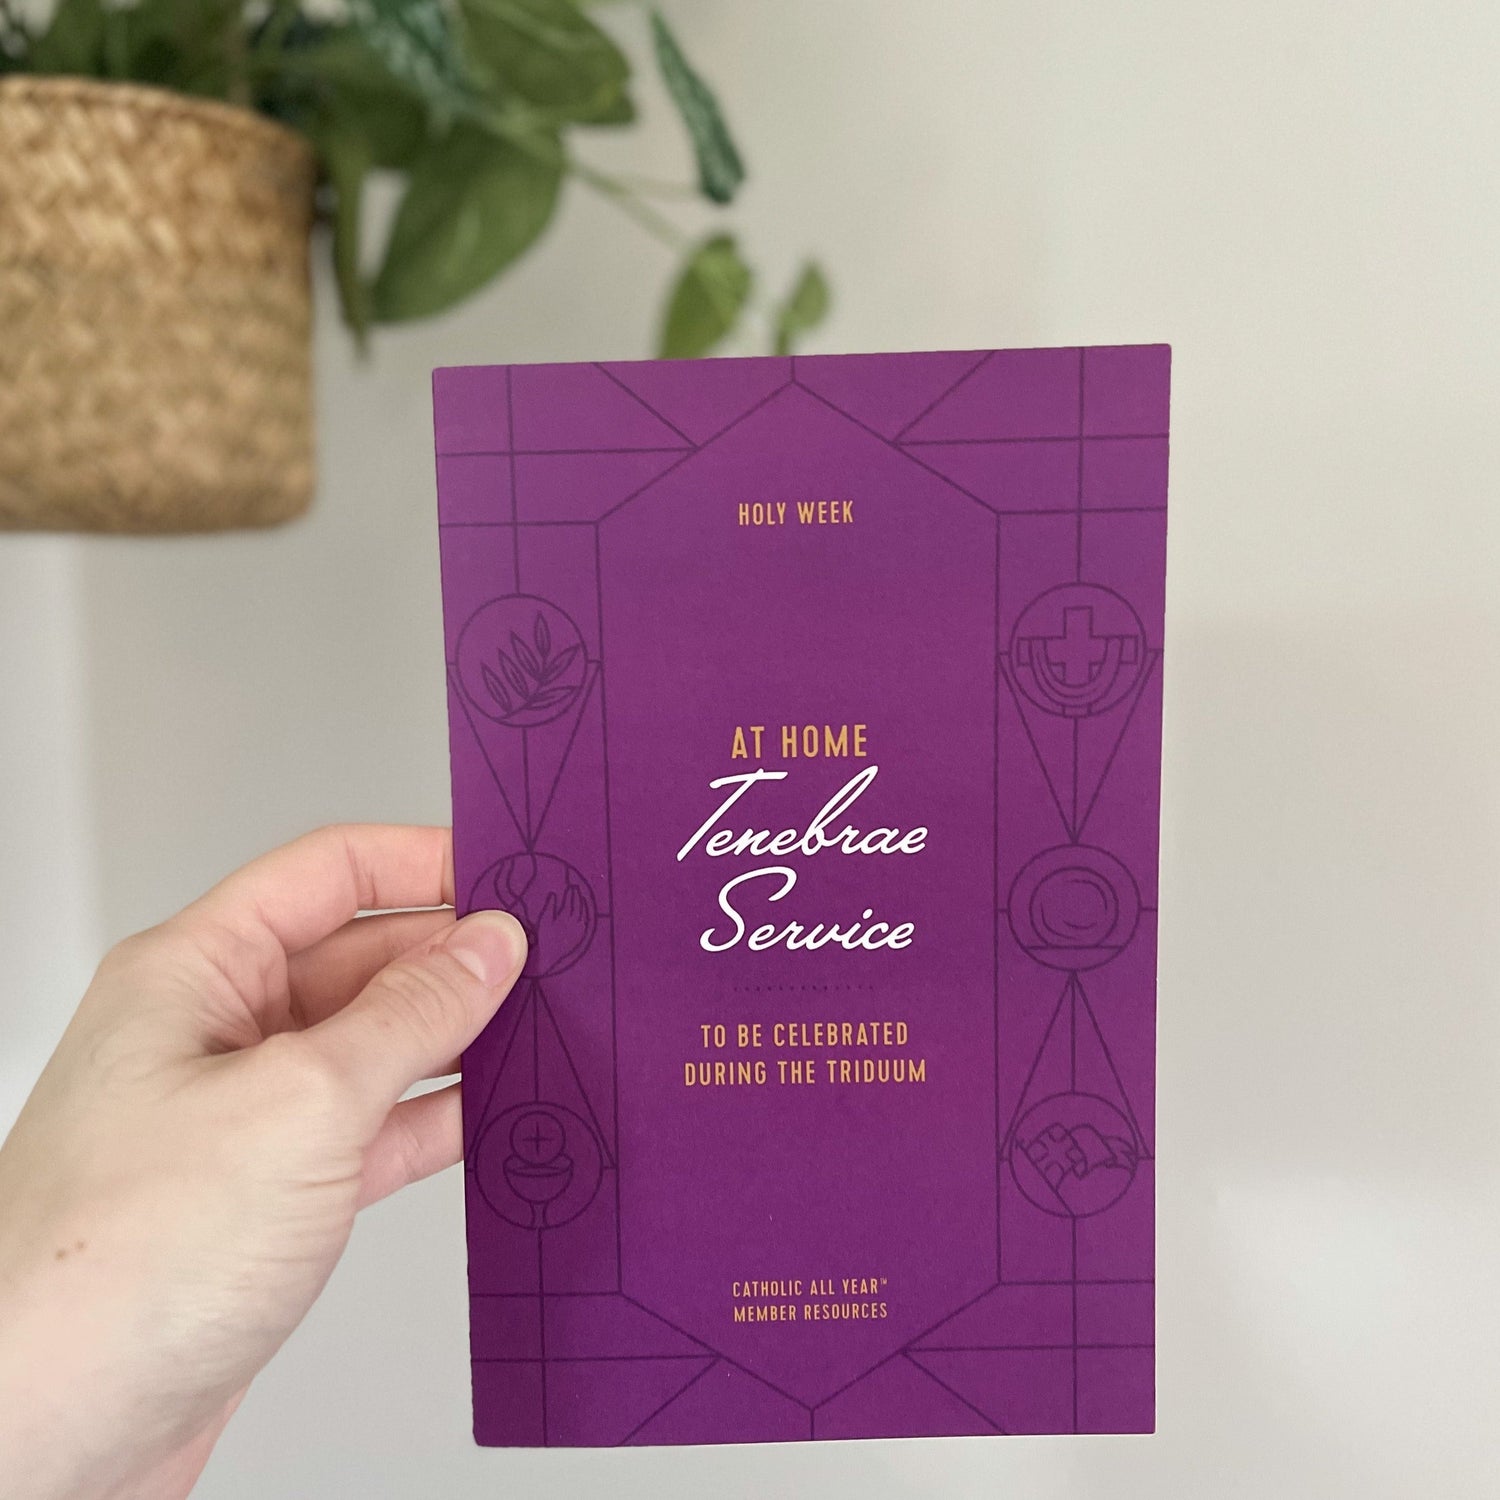 At Home Tenebrae Service Booklet